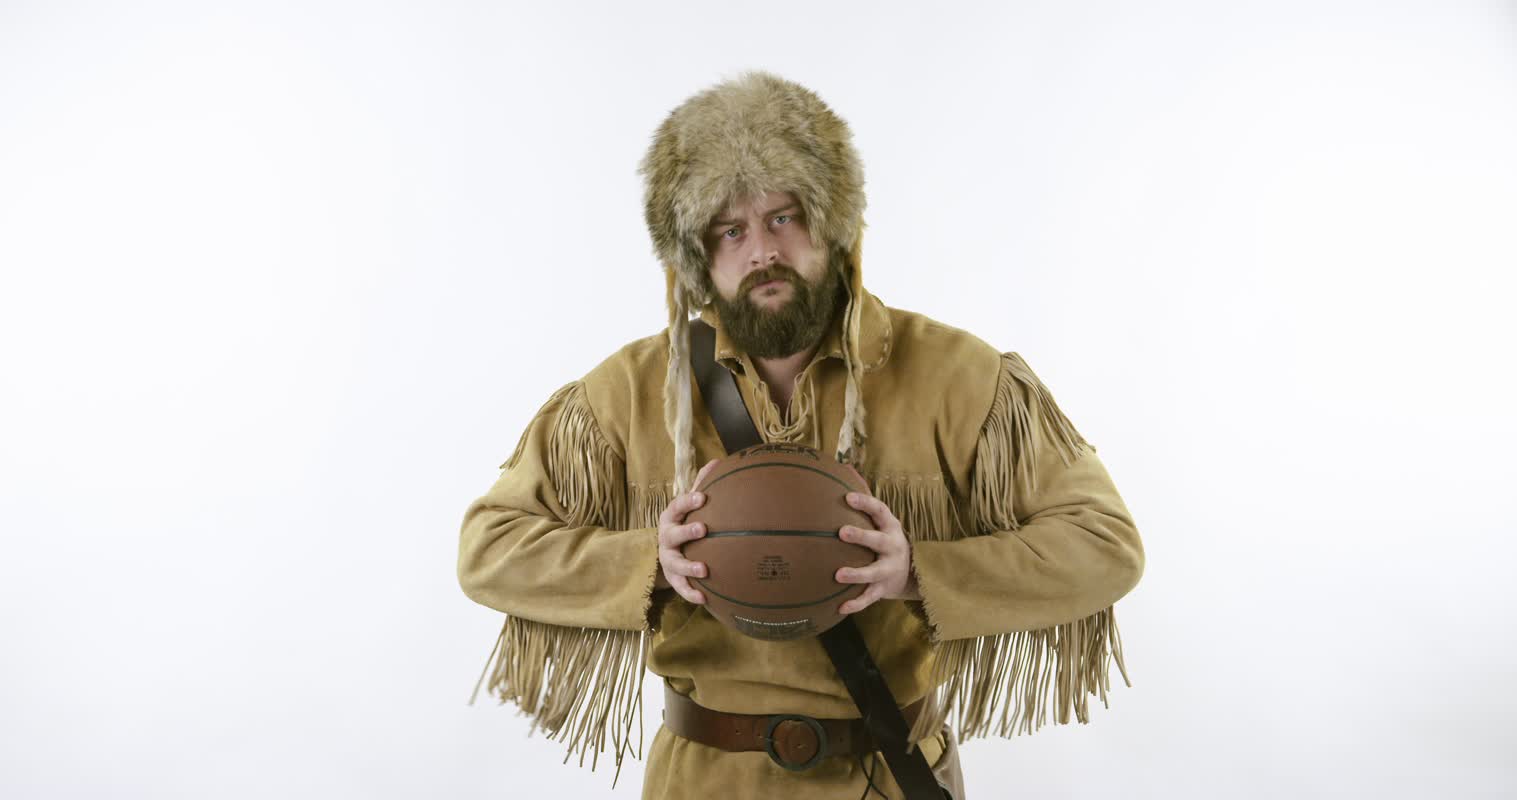 Old Trapper Announces 2021 Sponsorship of Inside College Basketball on the CBS Sports Network